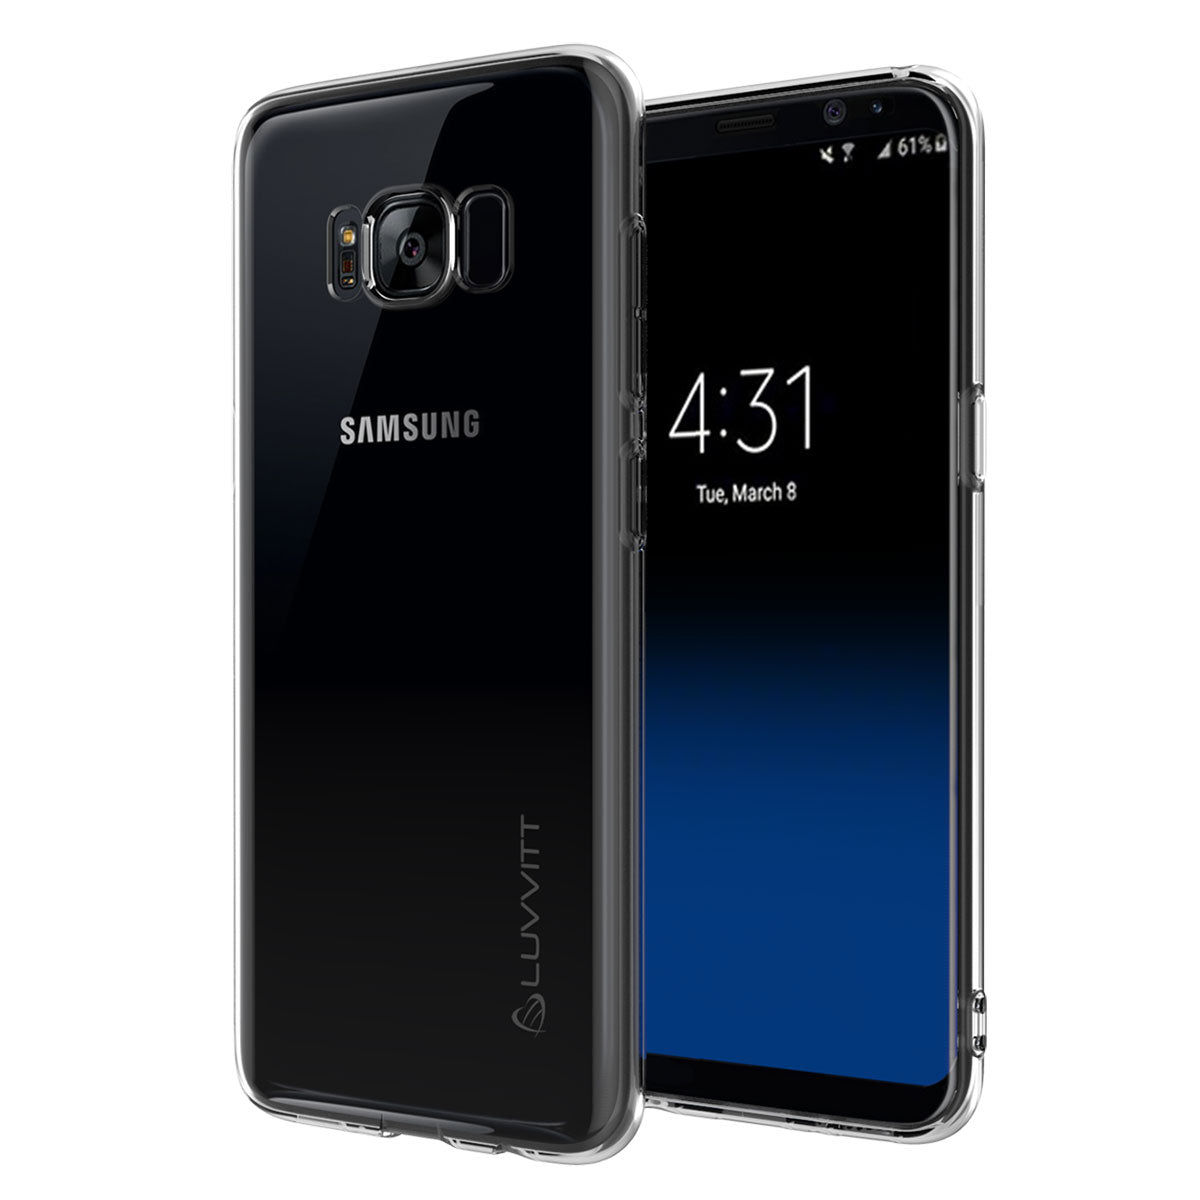 LUVVITT CLARITY Case for Galaxy S8 - Clear